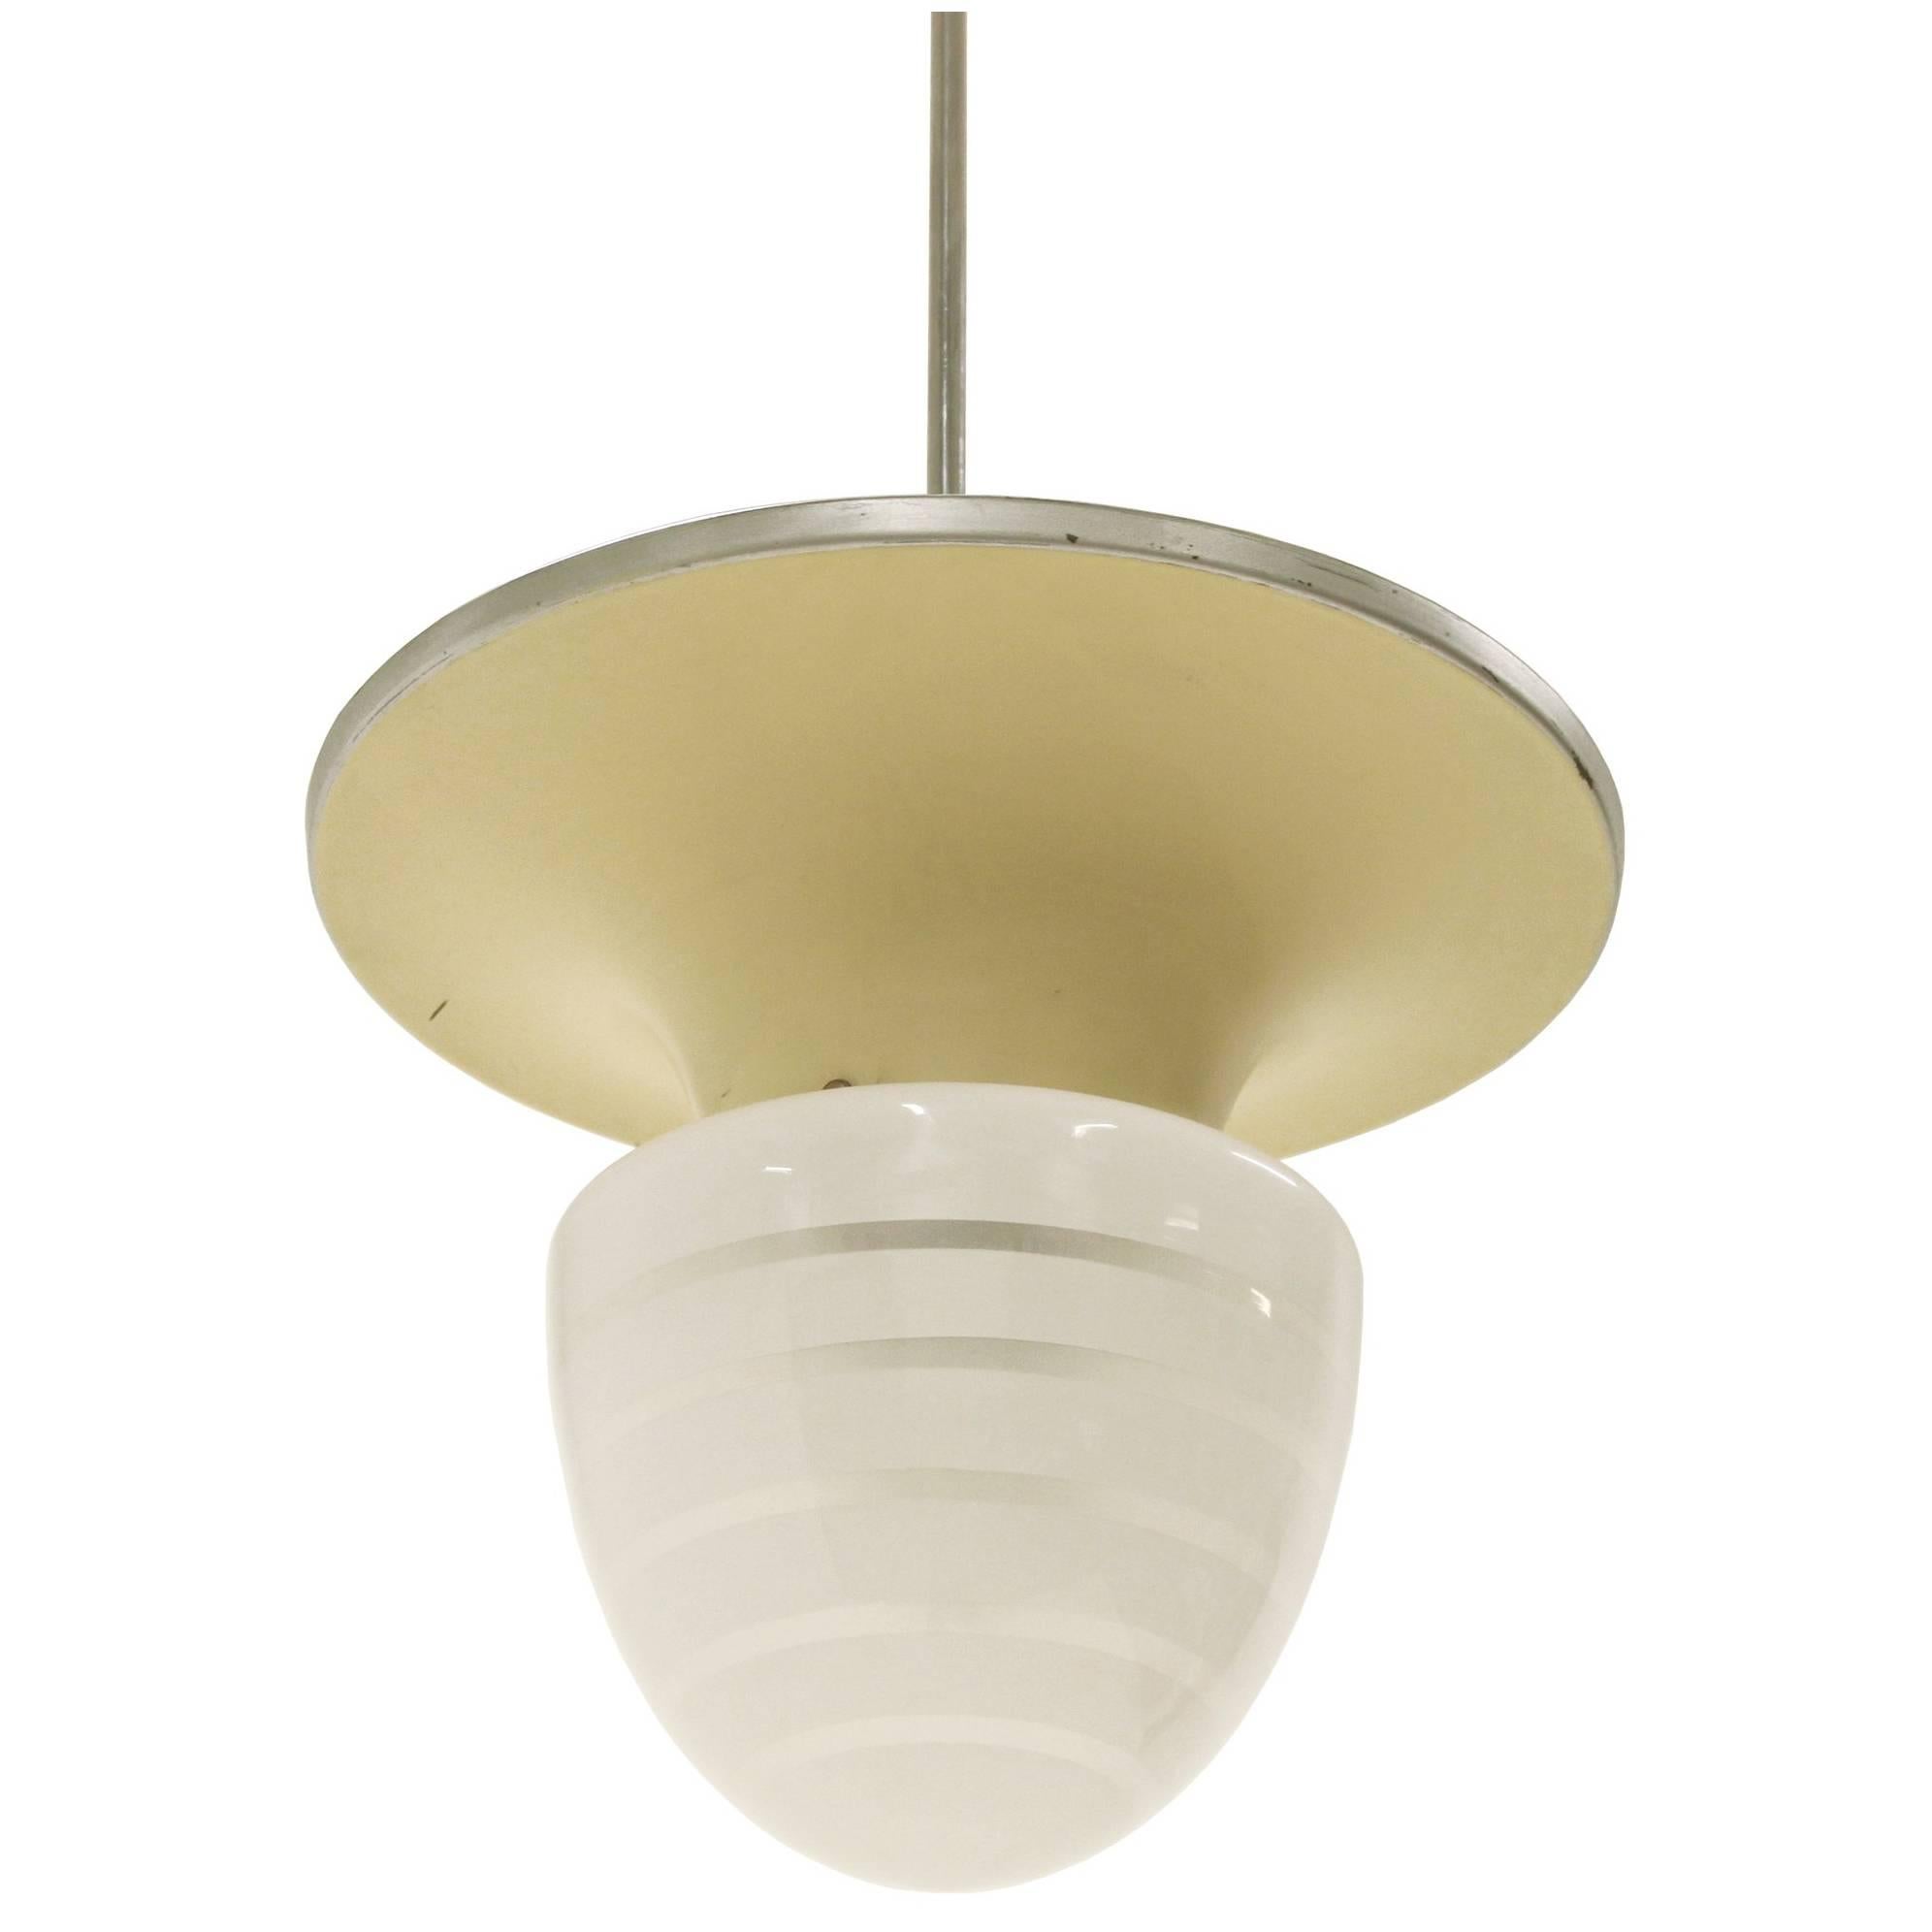 Functionalist Ceiling Light by Bolmarks, Sweden, 1930s In Good Condition For Sale In Oslo, NO